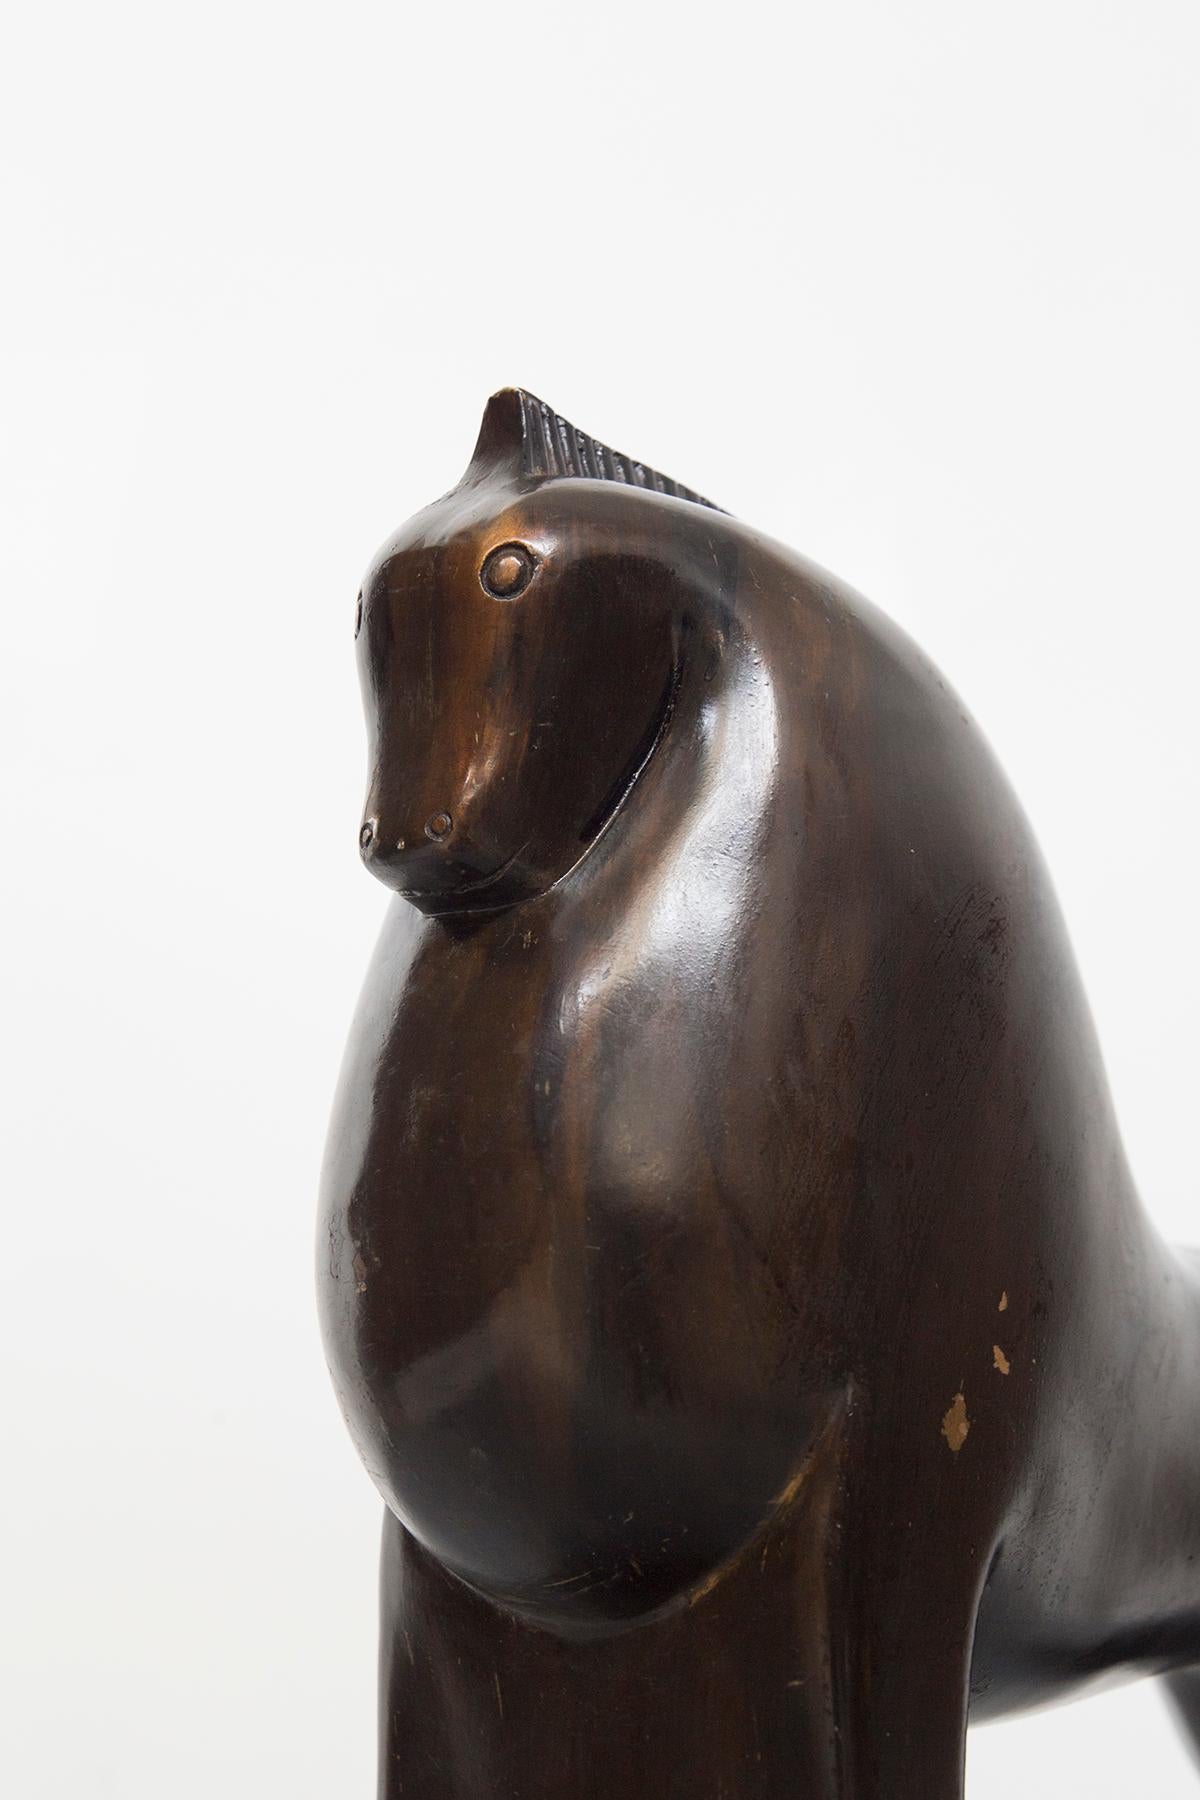 Splendid wooden sculpture attributed to the great Gio Ponti in the 1920s, fine Italian manufacture.
The sculpture is made entirely of solid dark wood, very elegant and is in the form of a horse.
The four legs are joined two by two, the front one is